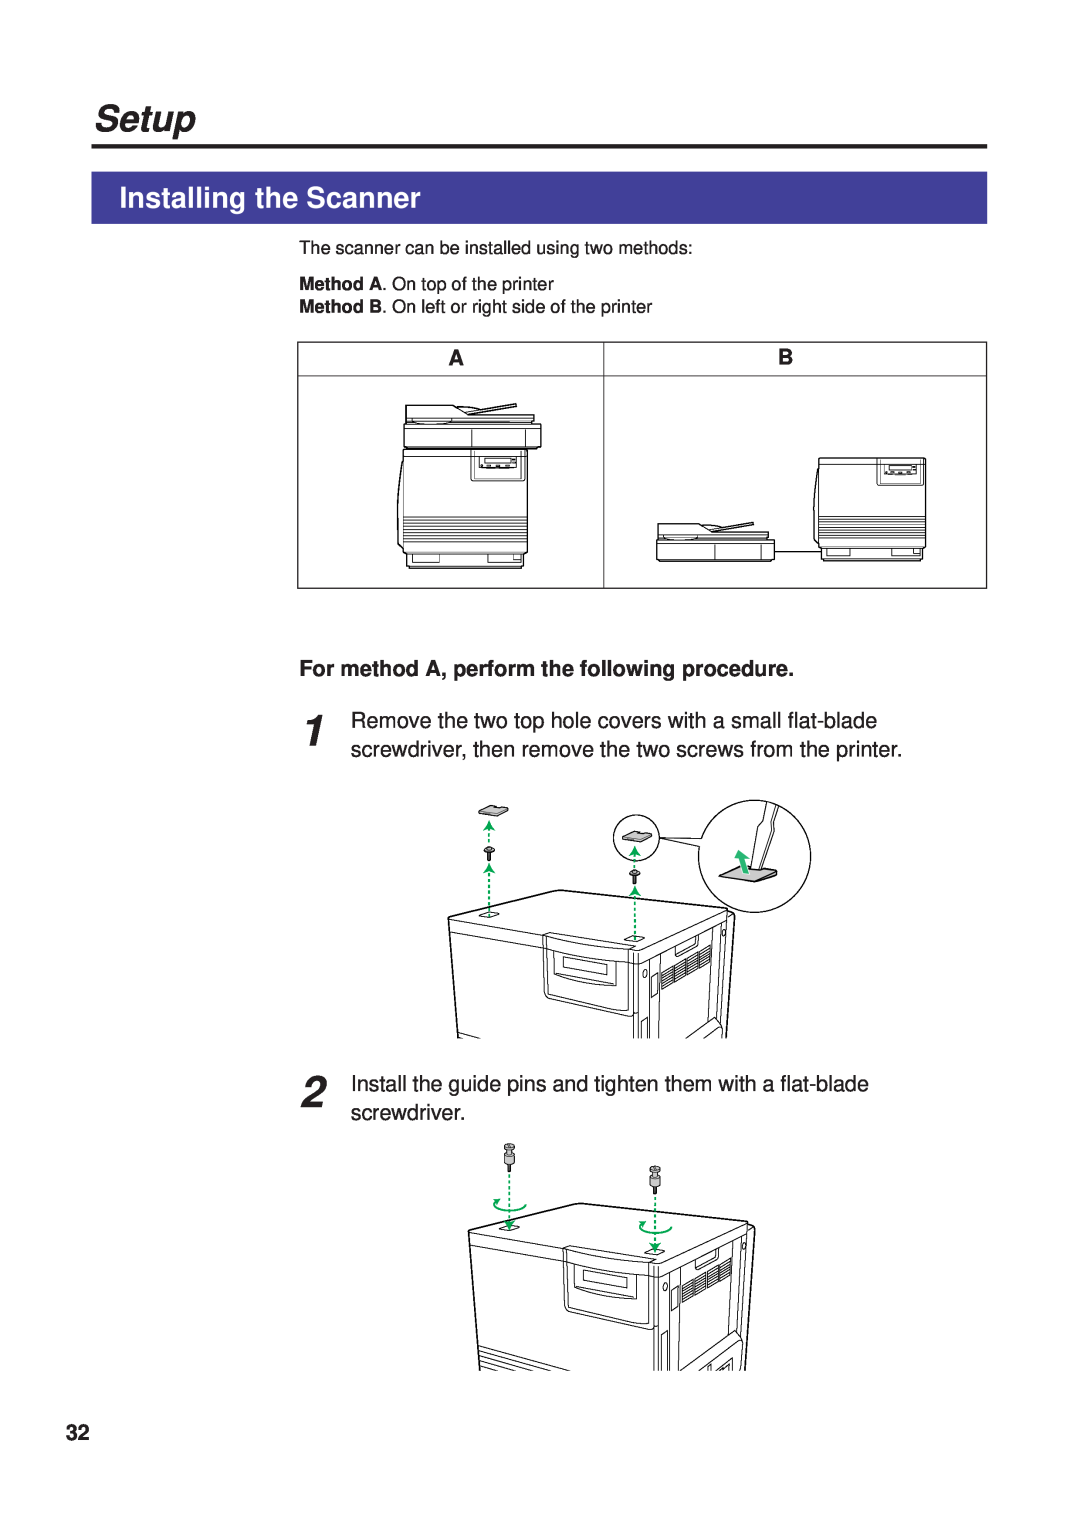 Panasonic KX-PS8000 manual Installing the Scanner, For method A, perform the following procedure, screwdriver, Setup 